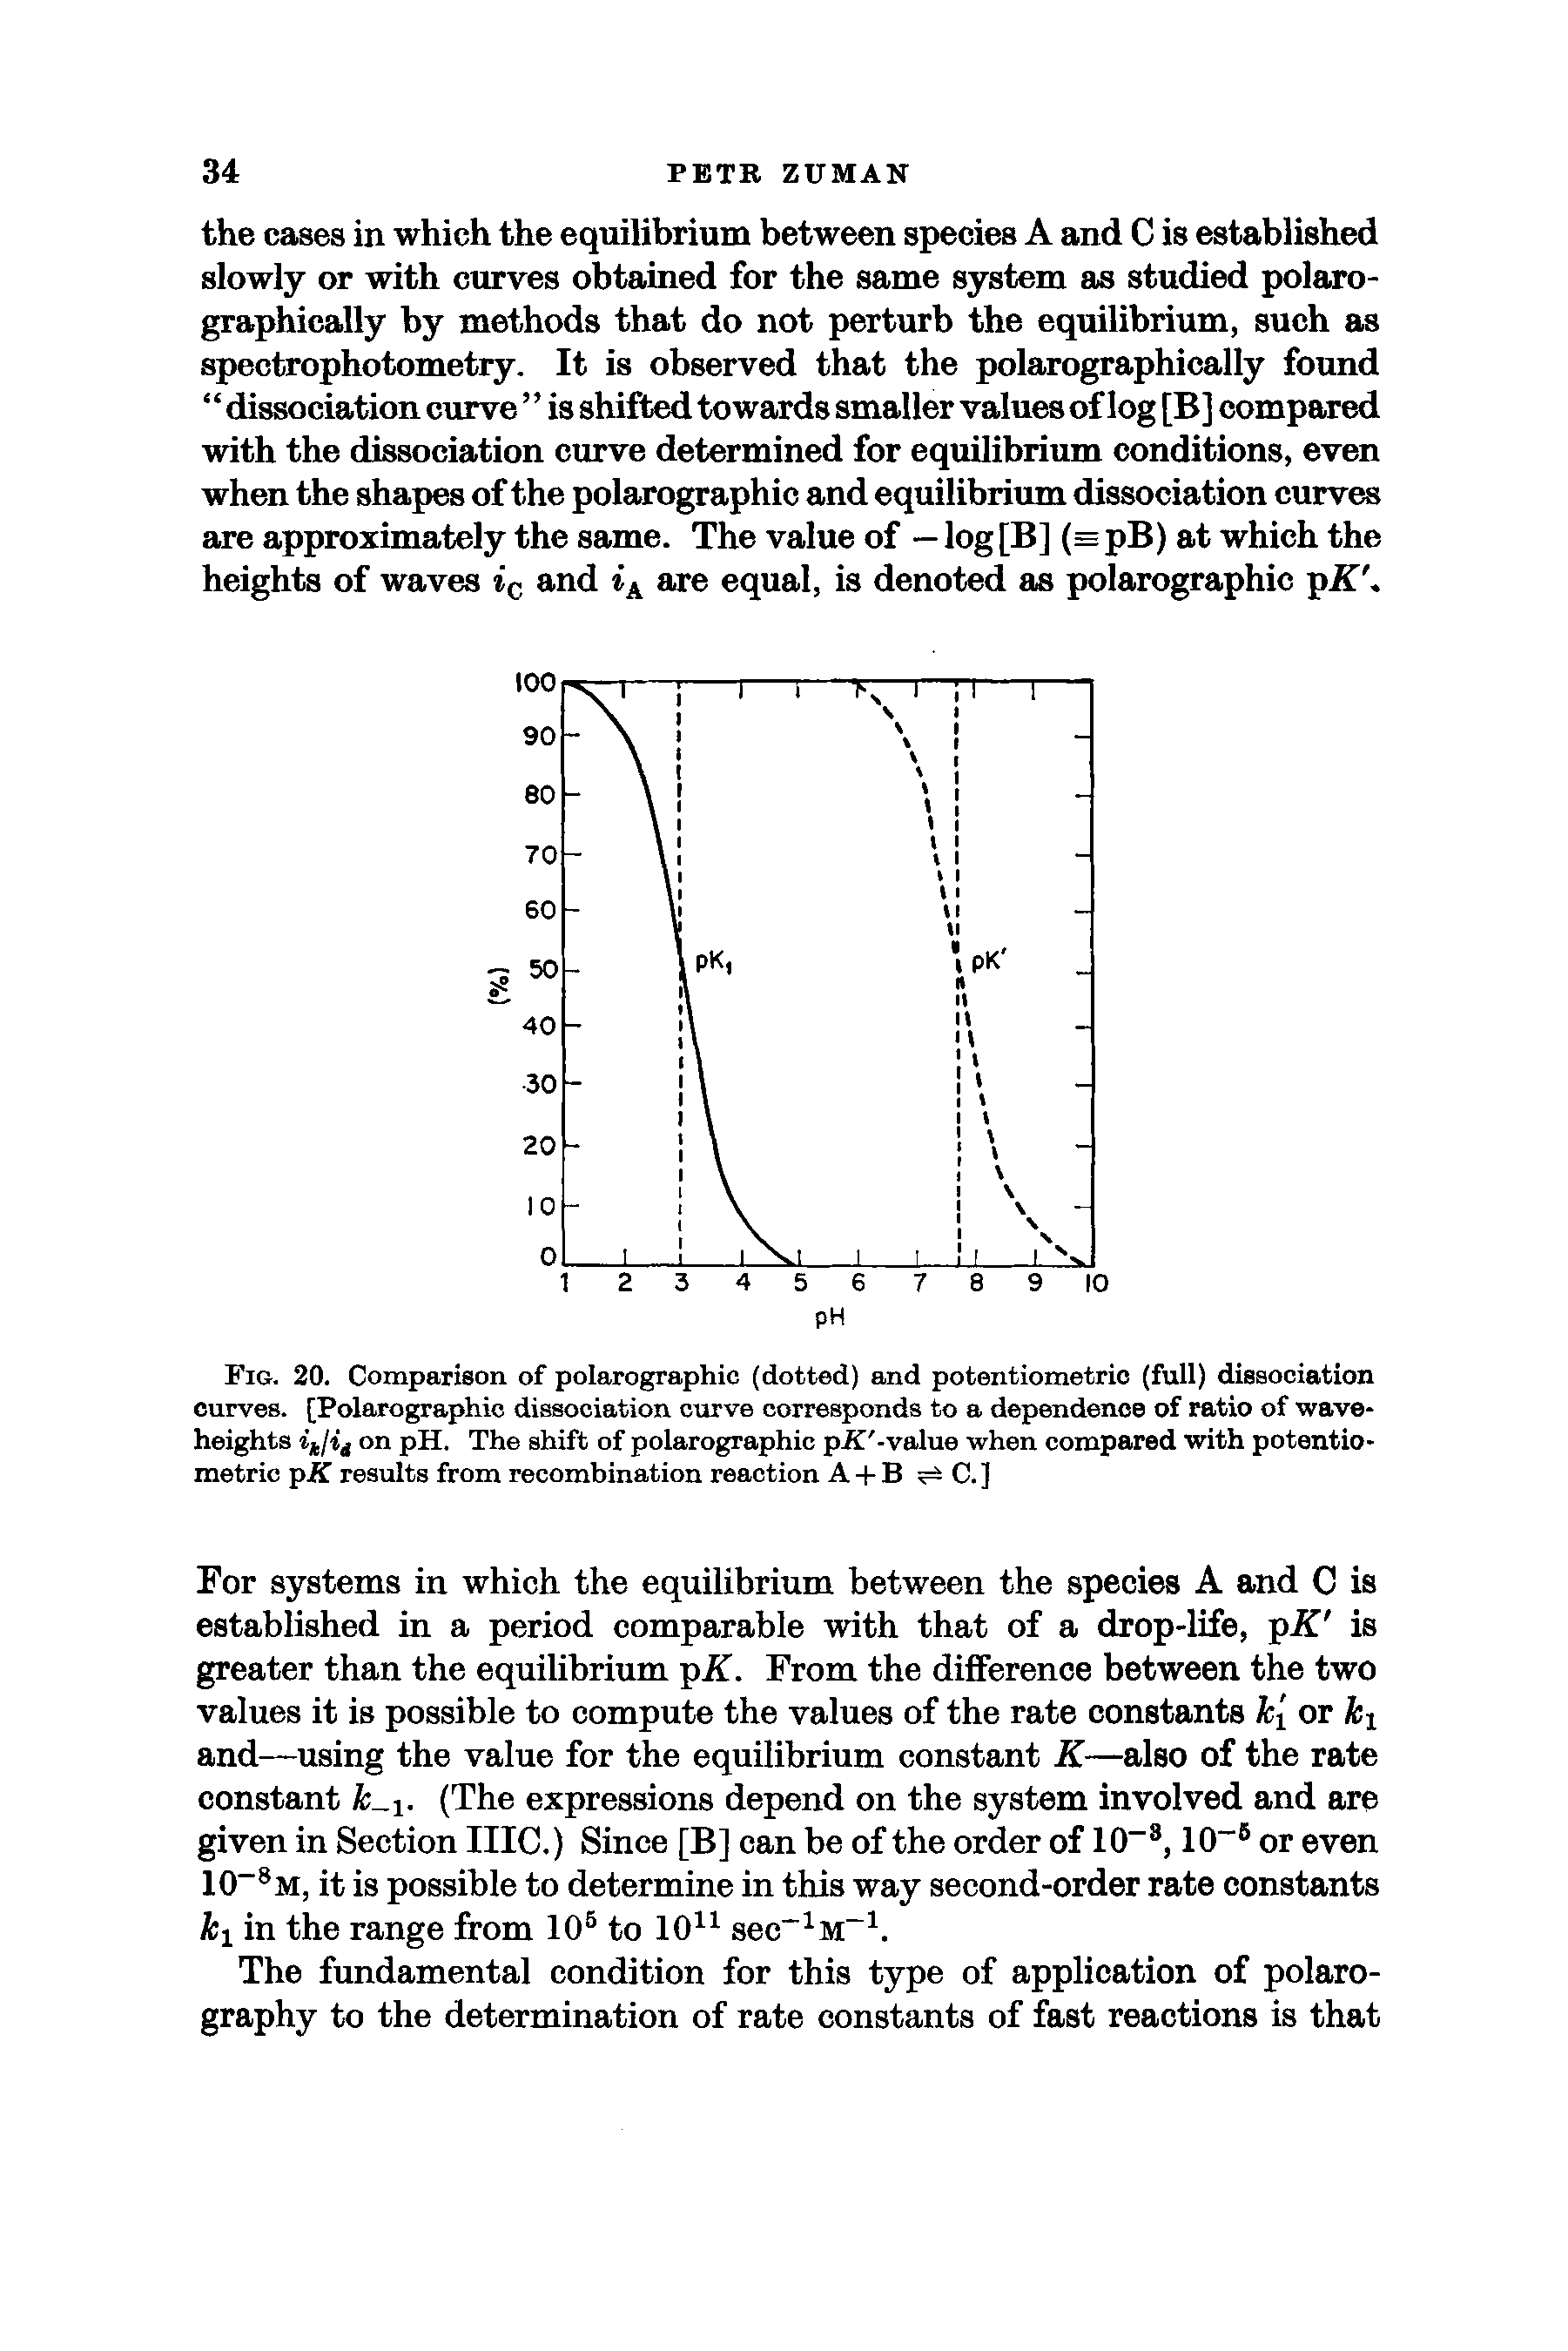 Fig. 20. Comparison of polarographic (dotted) and potentiometrio (full) dissociation curves. [Polarographic dissociation curve corresponds to a dependence of ratio of wave-heights i/ilif on pH. The shift of polarographic p C -value when compared with potentio-metric pi results from recombination reaction A 4-B C.]...